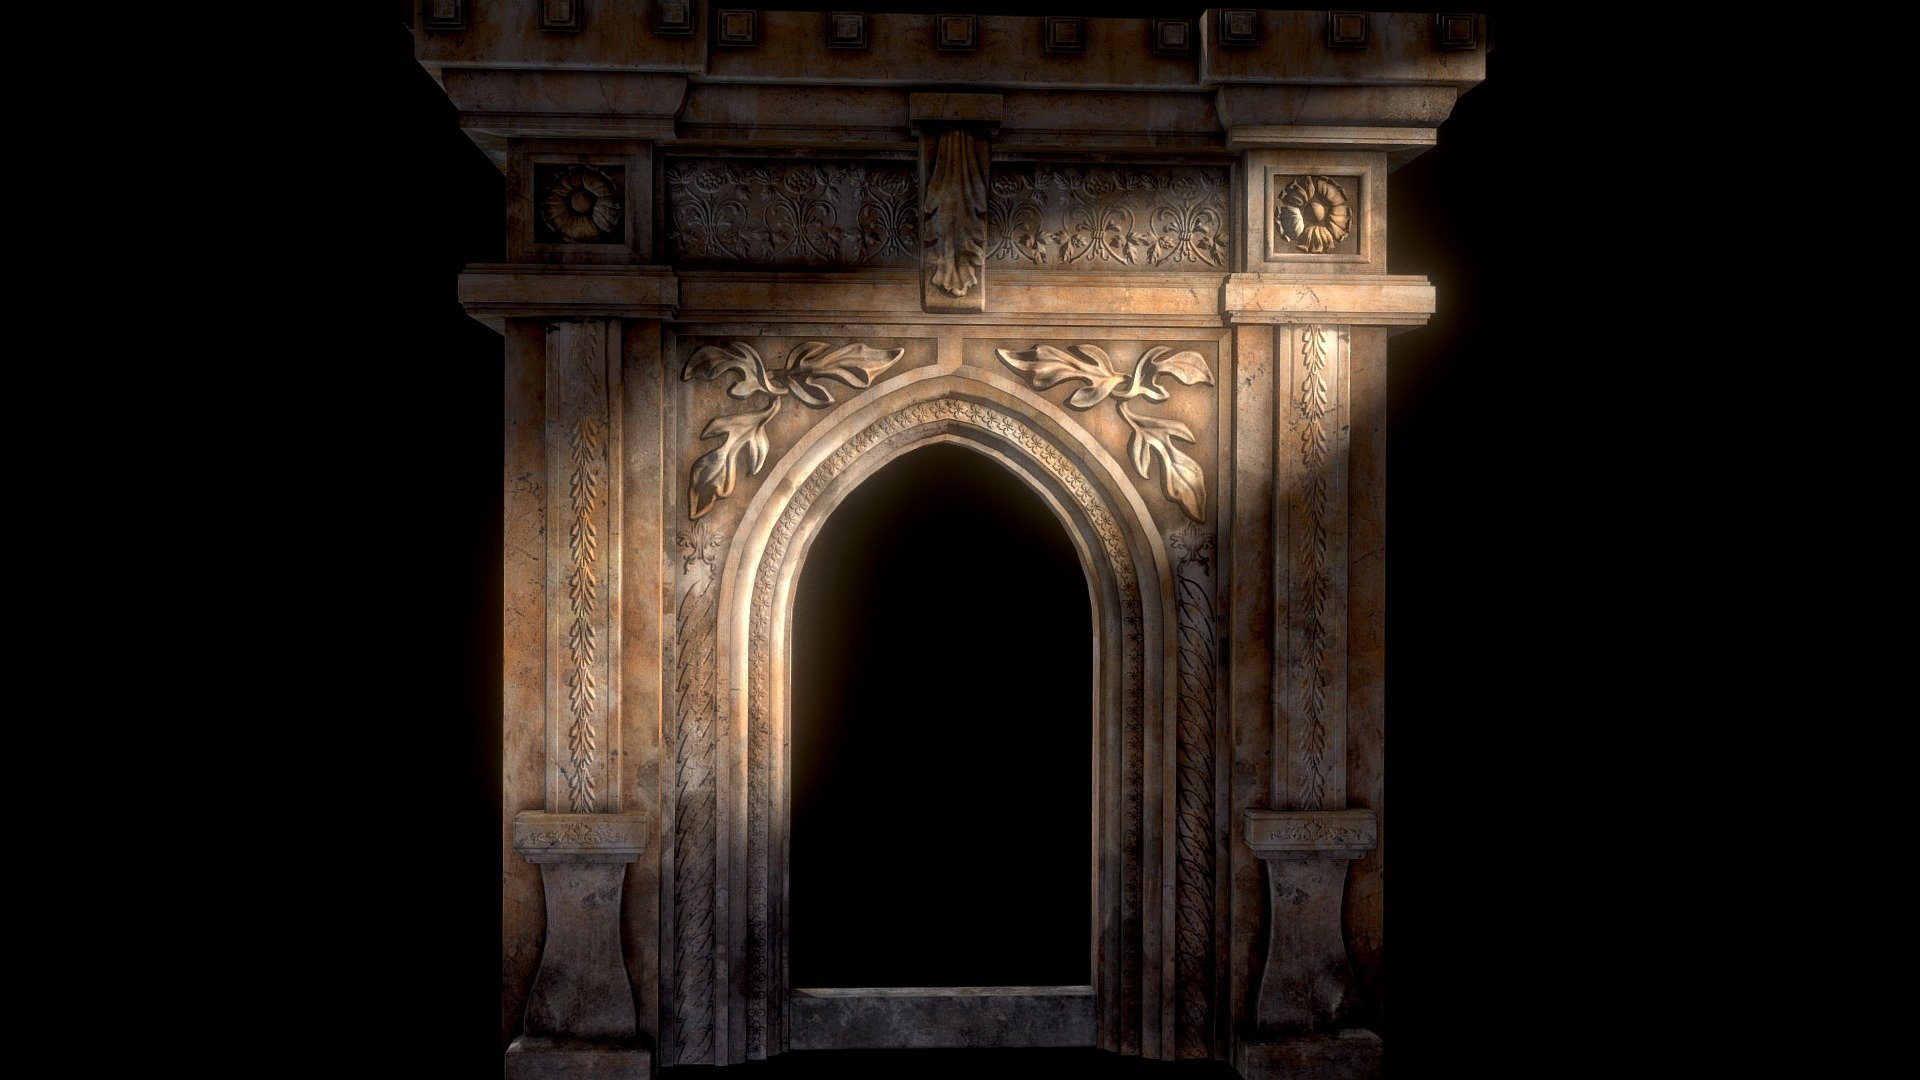 Gothic Stone Arch Low Poly Game Ready 3d Model By Gilded 8 Gilded8 0ede334 Sketchfab